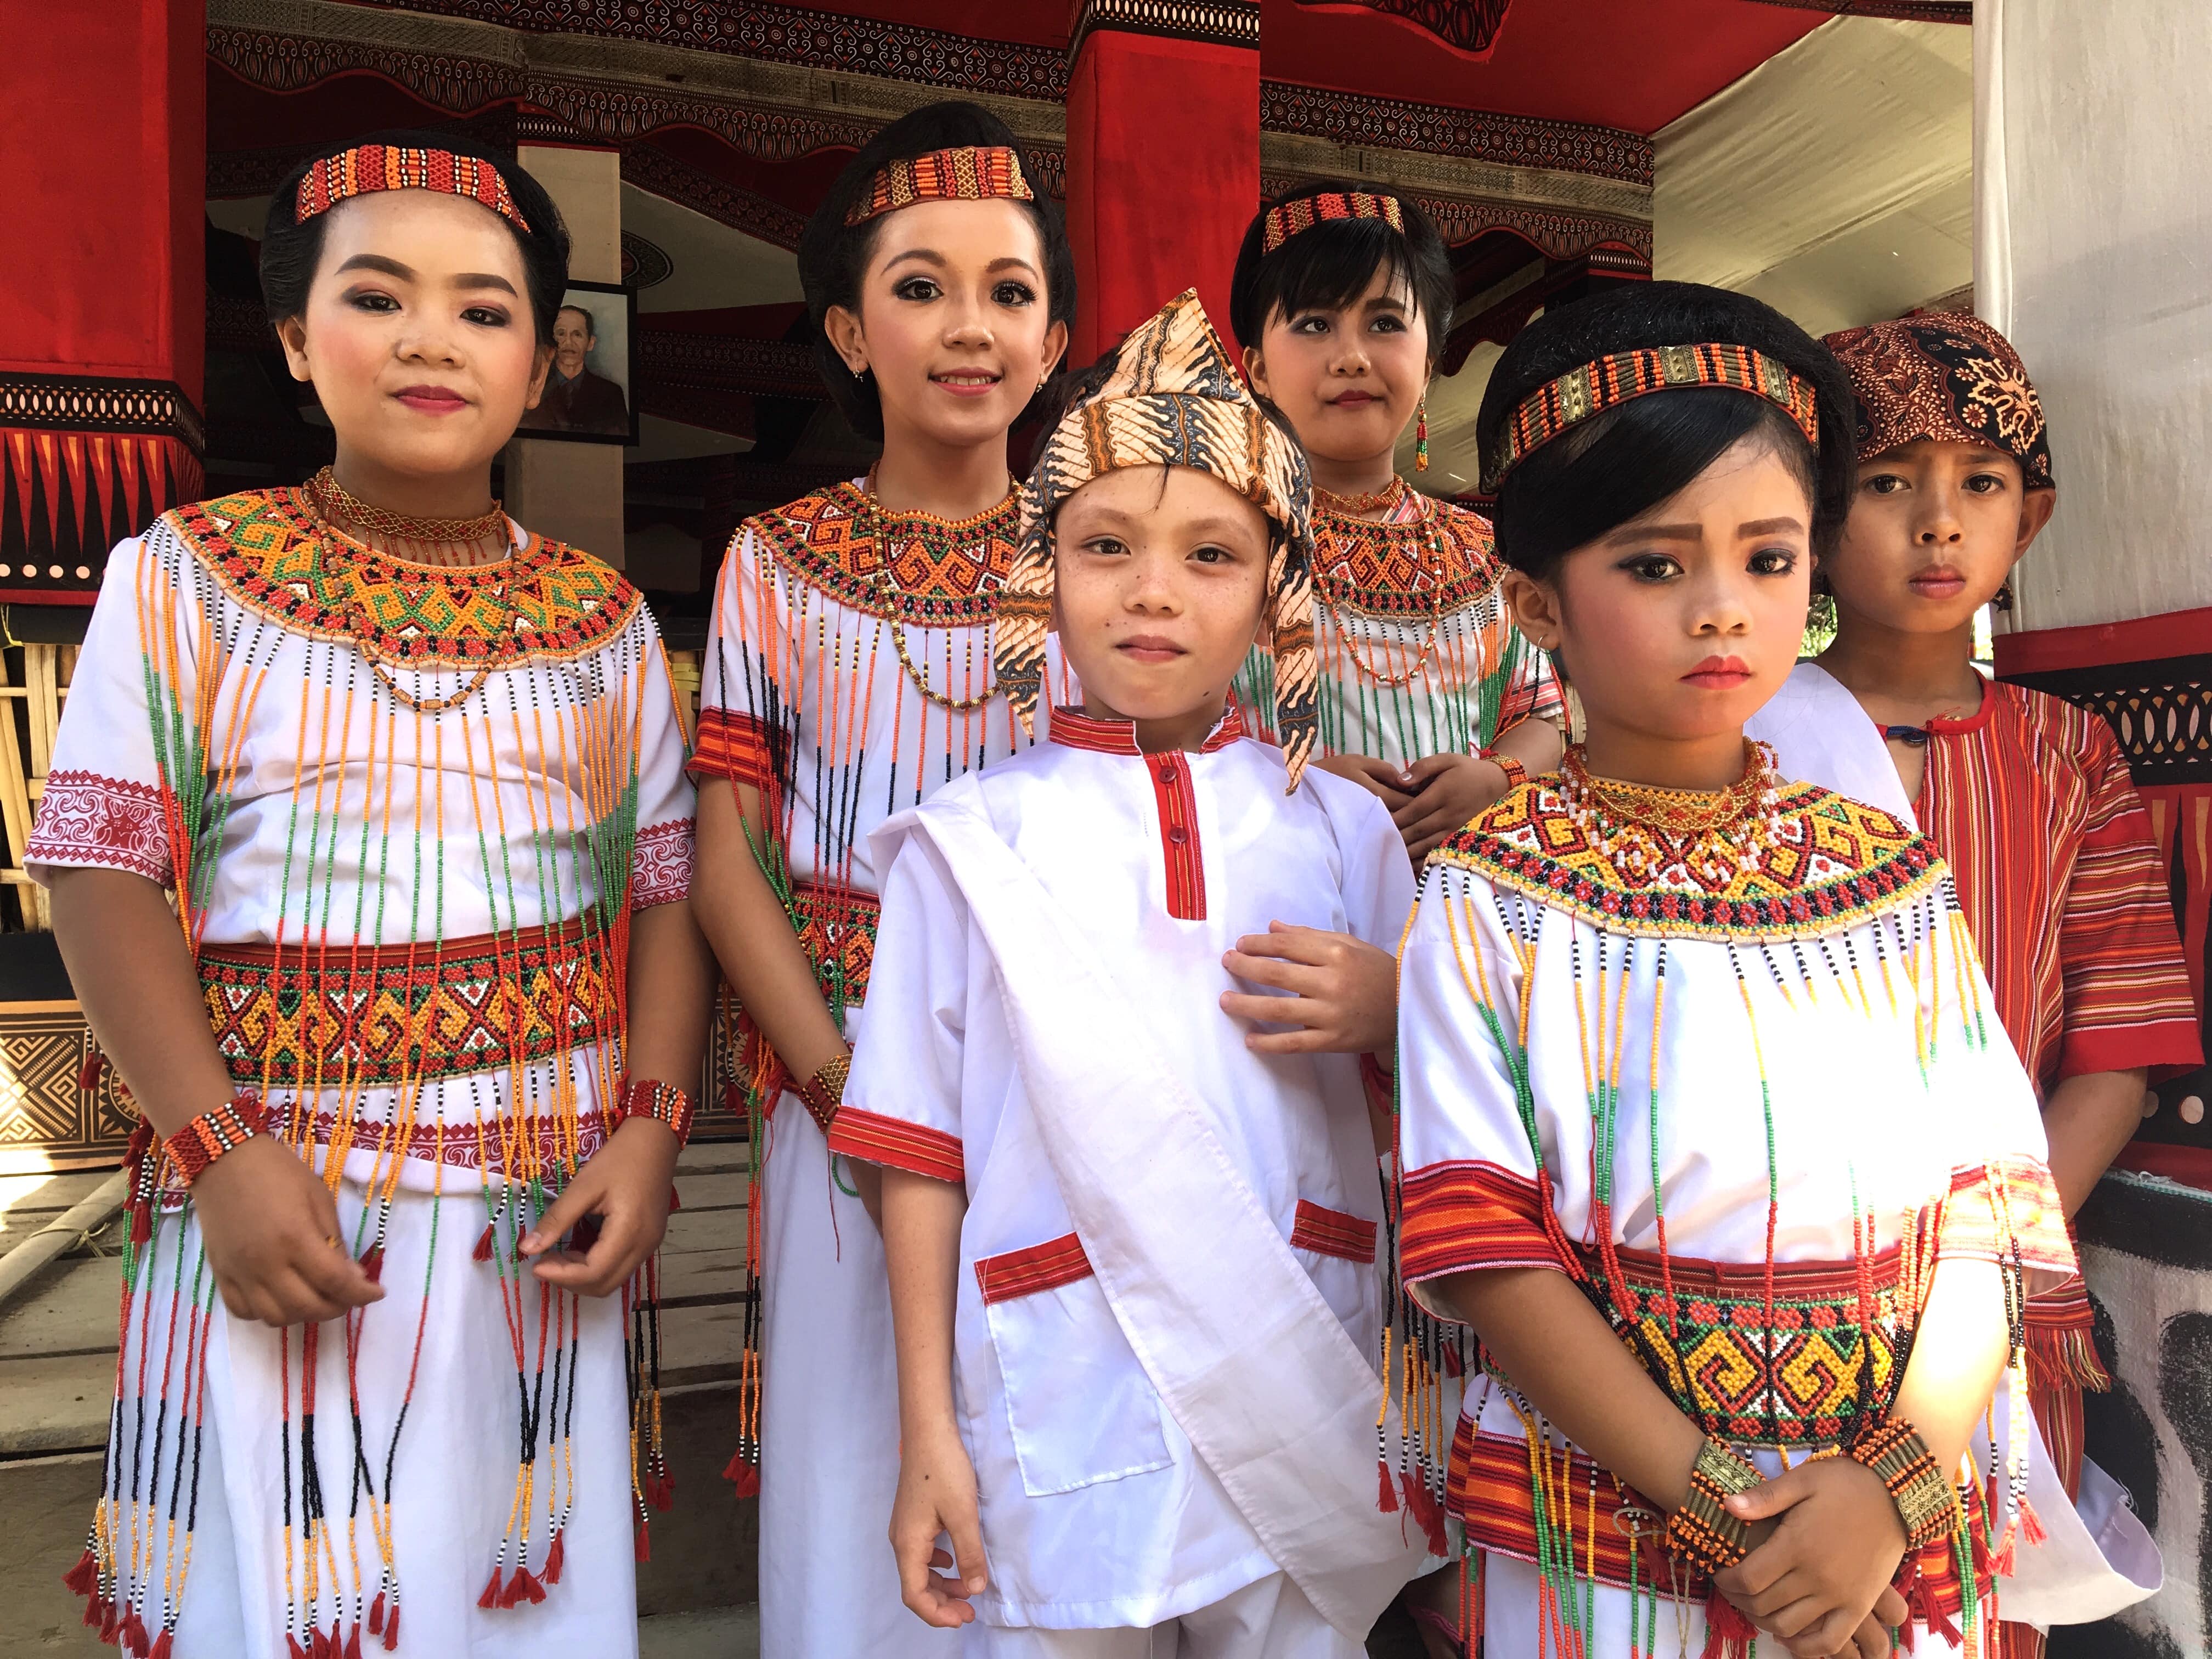 Torajan children in costume prior to a funeral dance. Children are an important and common feature during funerals, representing rebirth in the next life; the motifs of their clothing convey special symbolism, as does the color white, in contrast to the traditional mourners’ black.